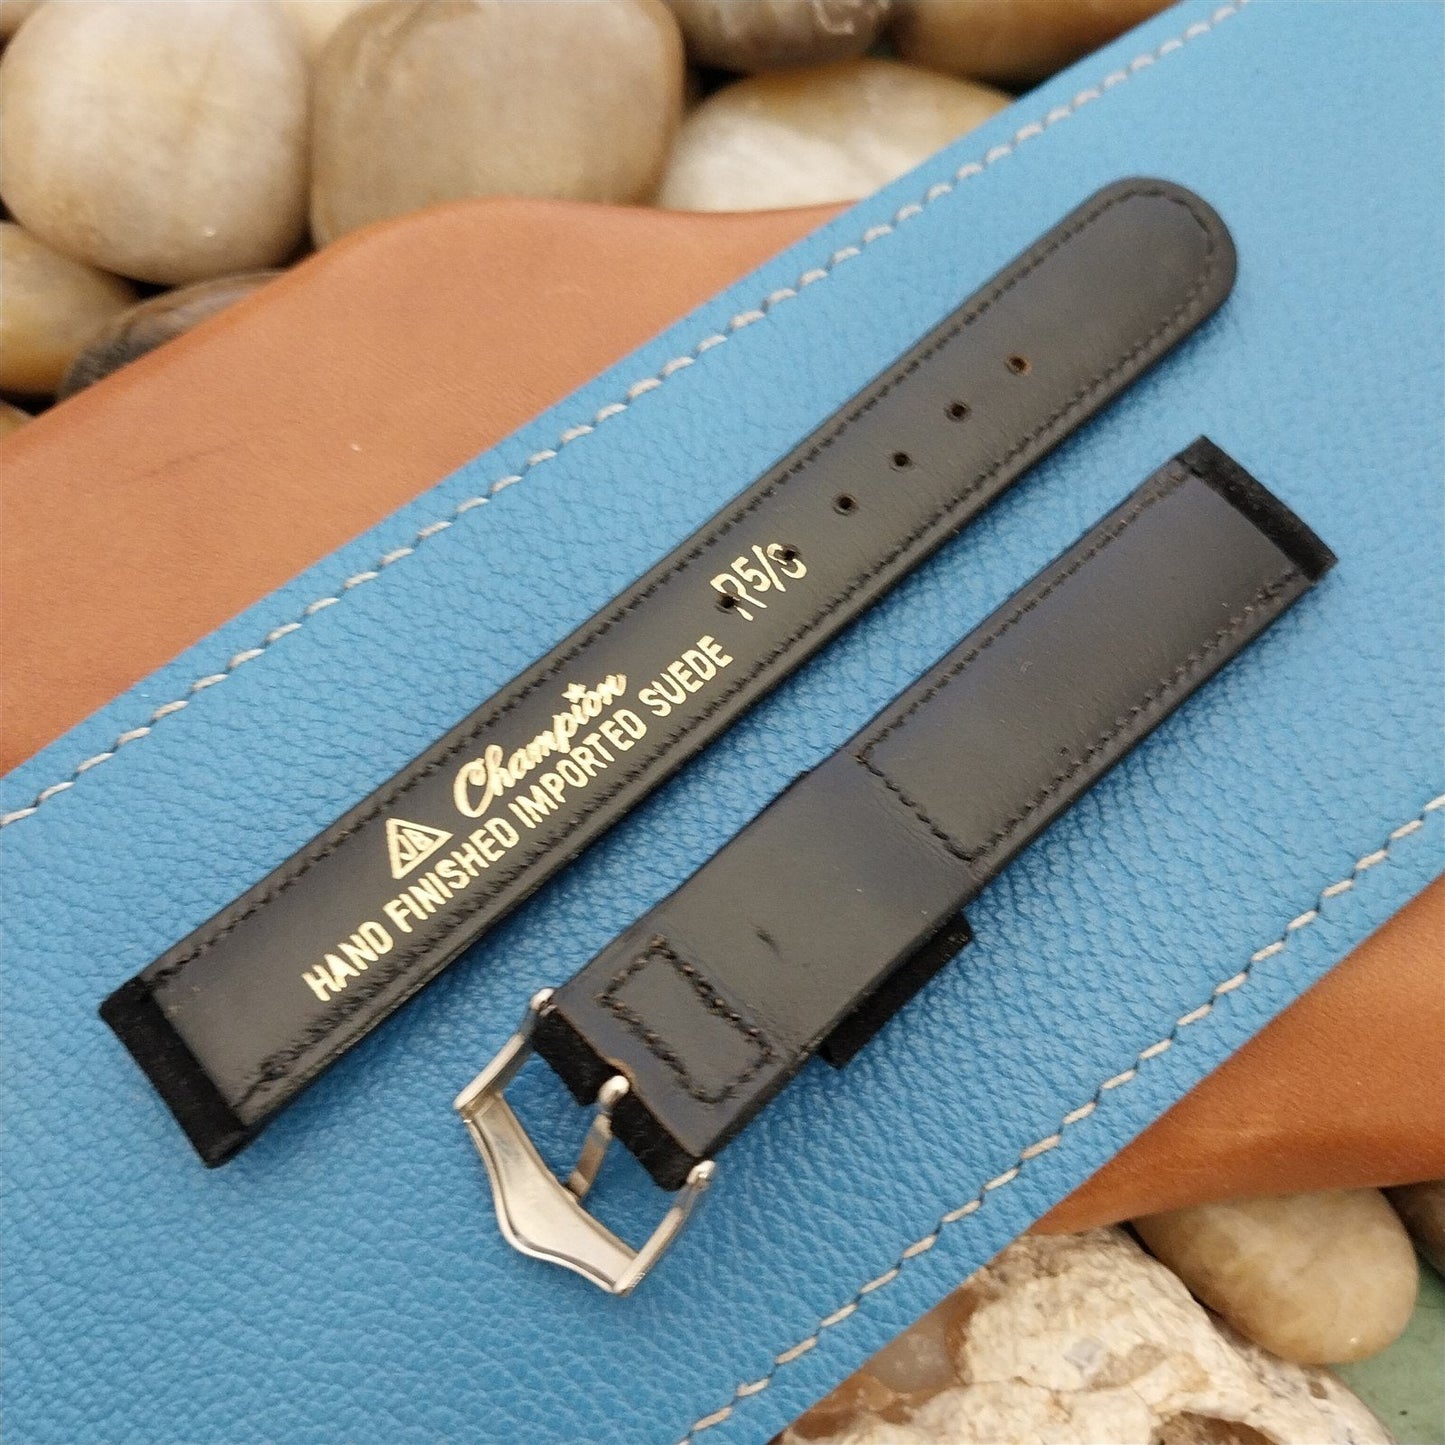 5/8" JB Champion USA Black Imported Suede Unused nos 1960s Vintage Watch Band